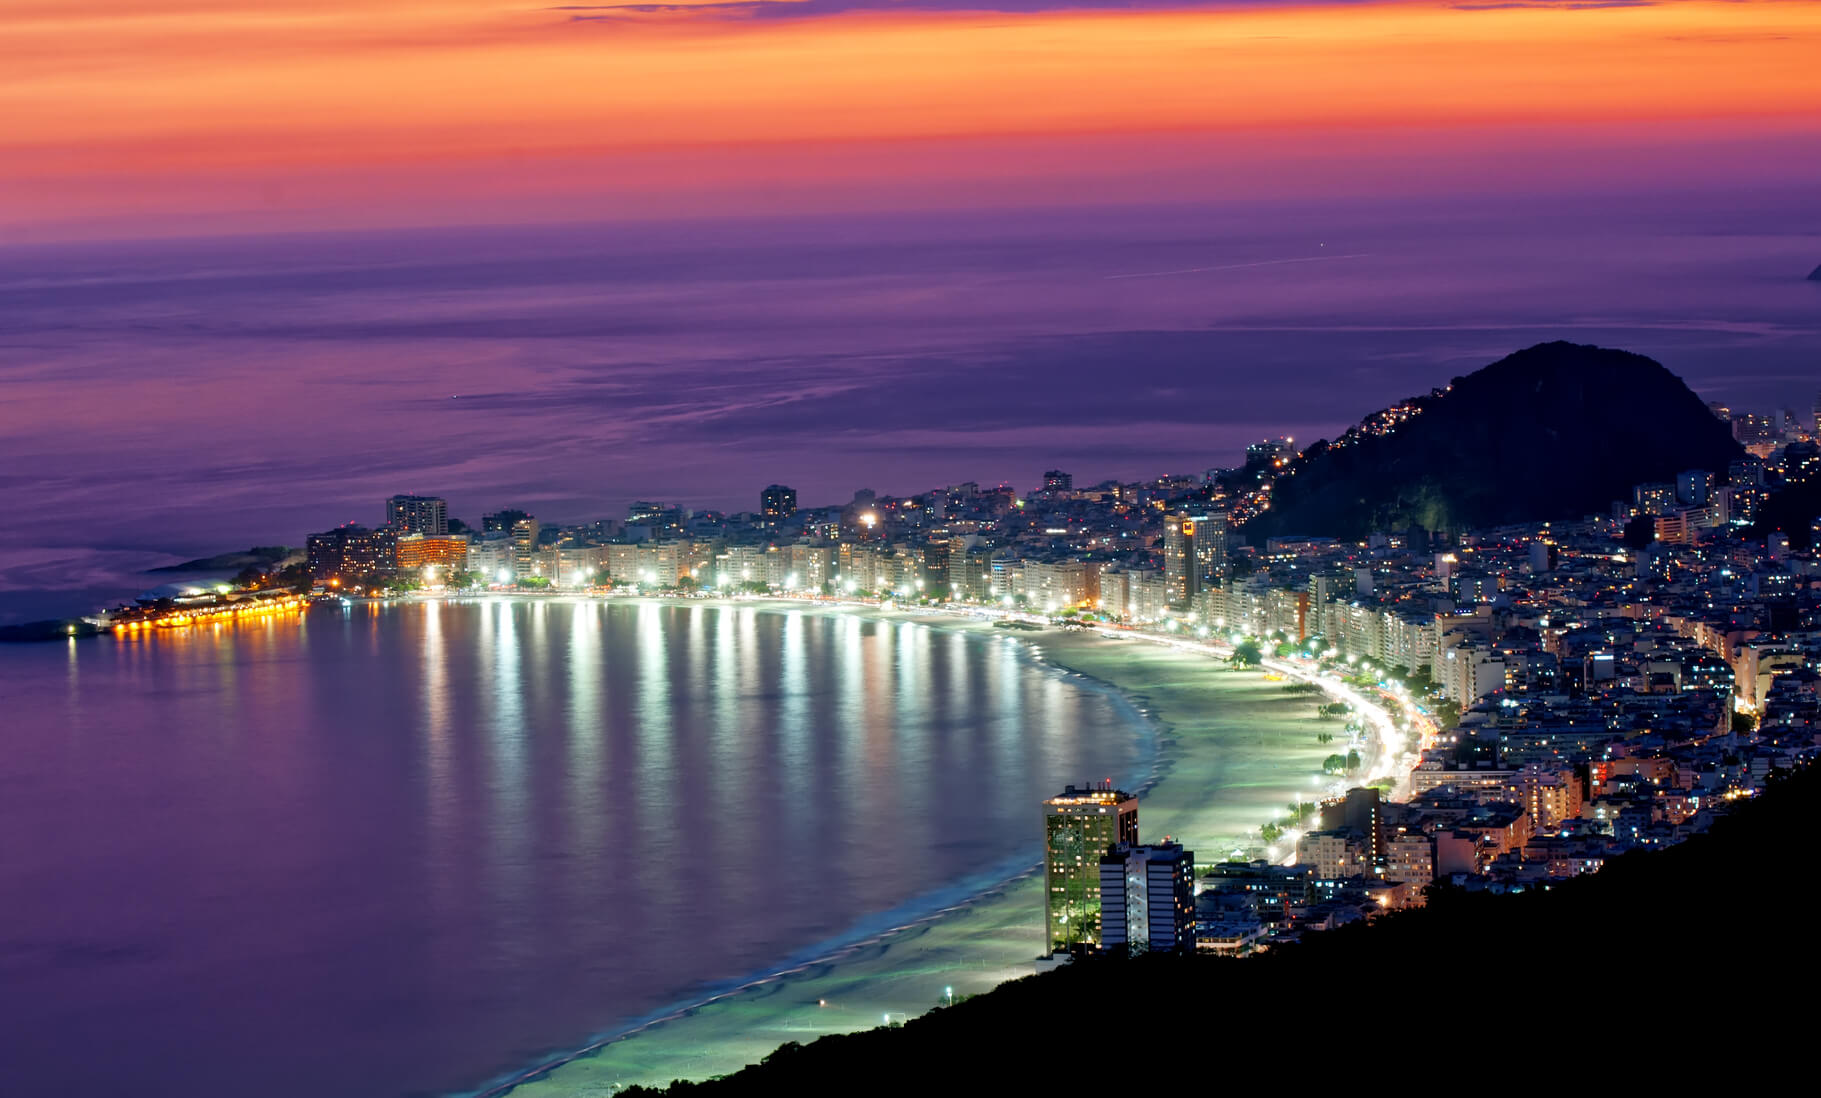 Flight deals from Los Angeles to either Rio De Janeiro or Sao Paulo, Brazil | Secret Flying